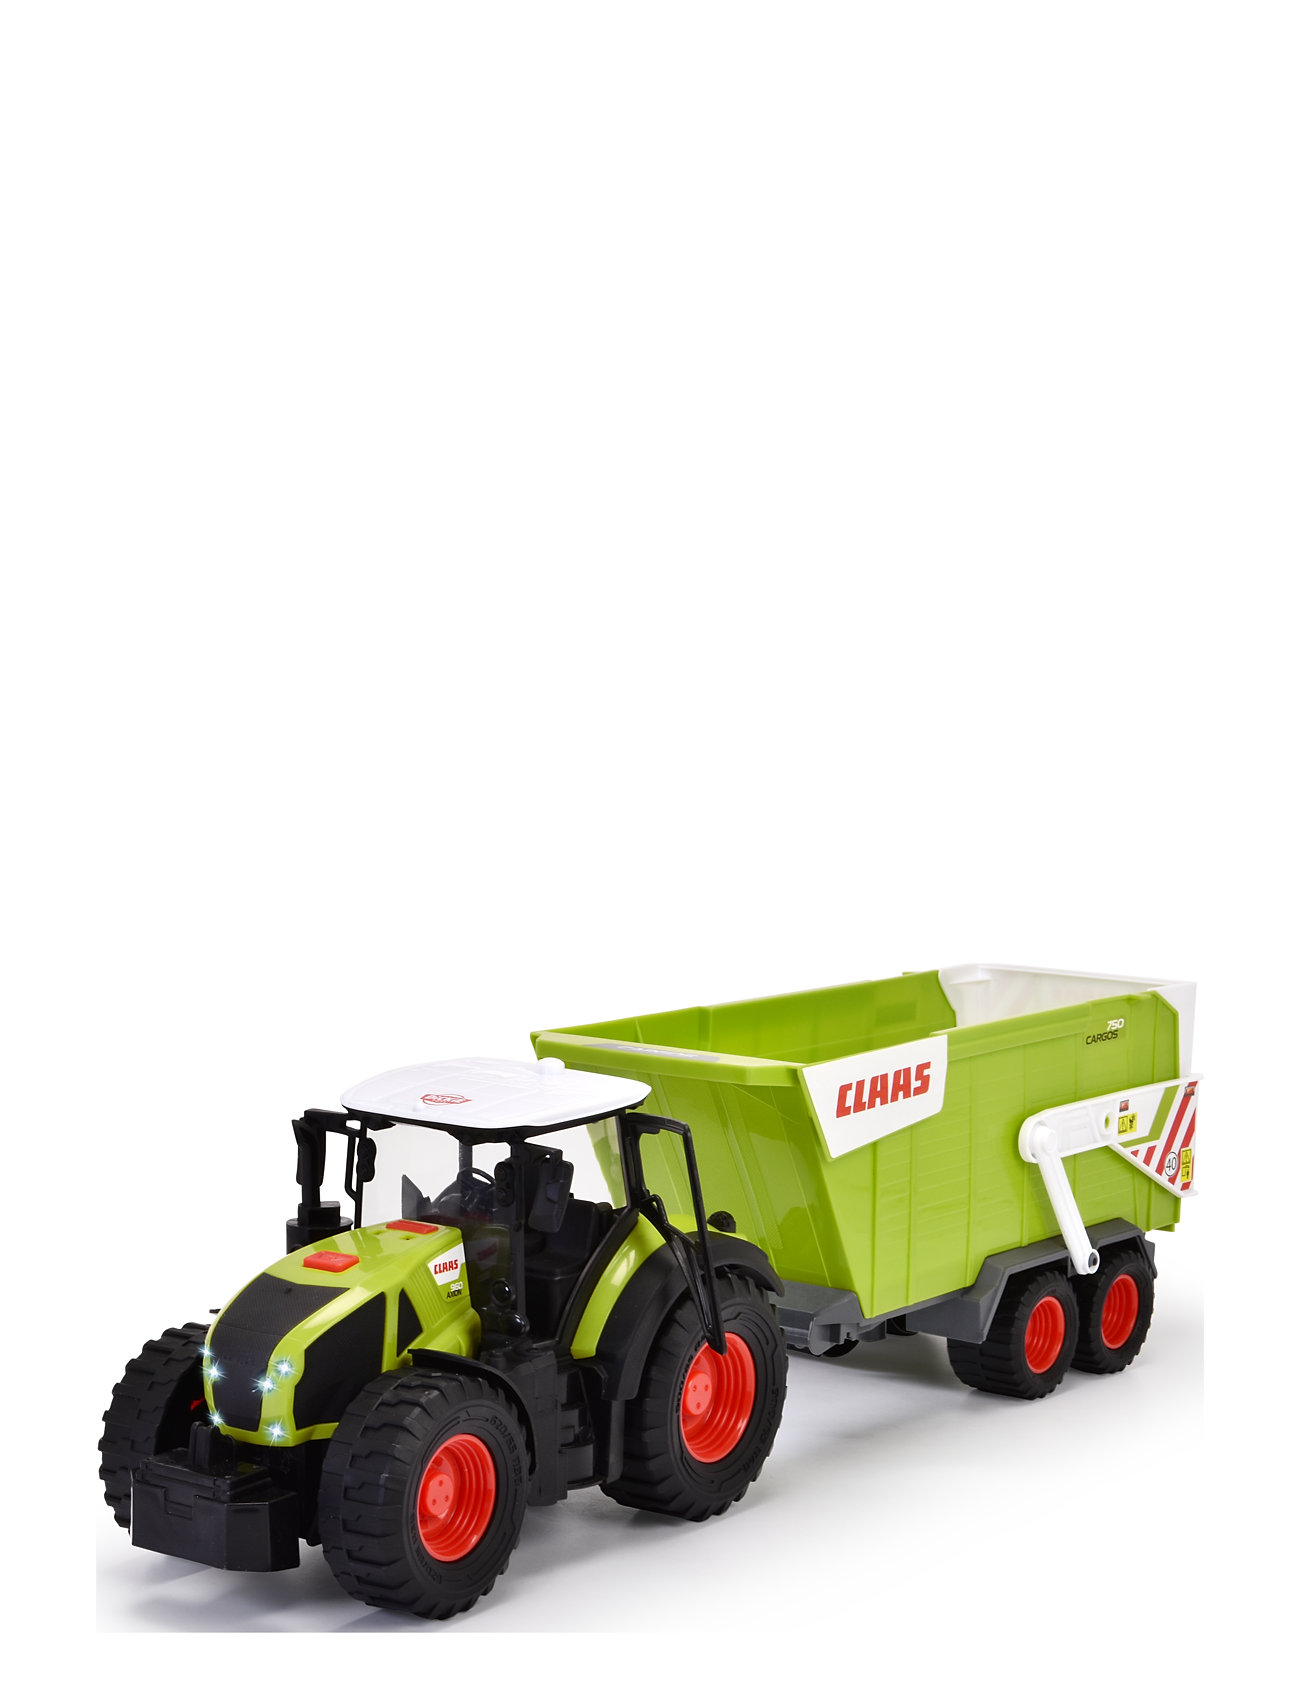 Claas Farm Tractor & Trailer Toys Toy Cars & Vehicles Toy Vehicles Tractors Multi/patterned Dickie Toys